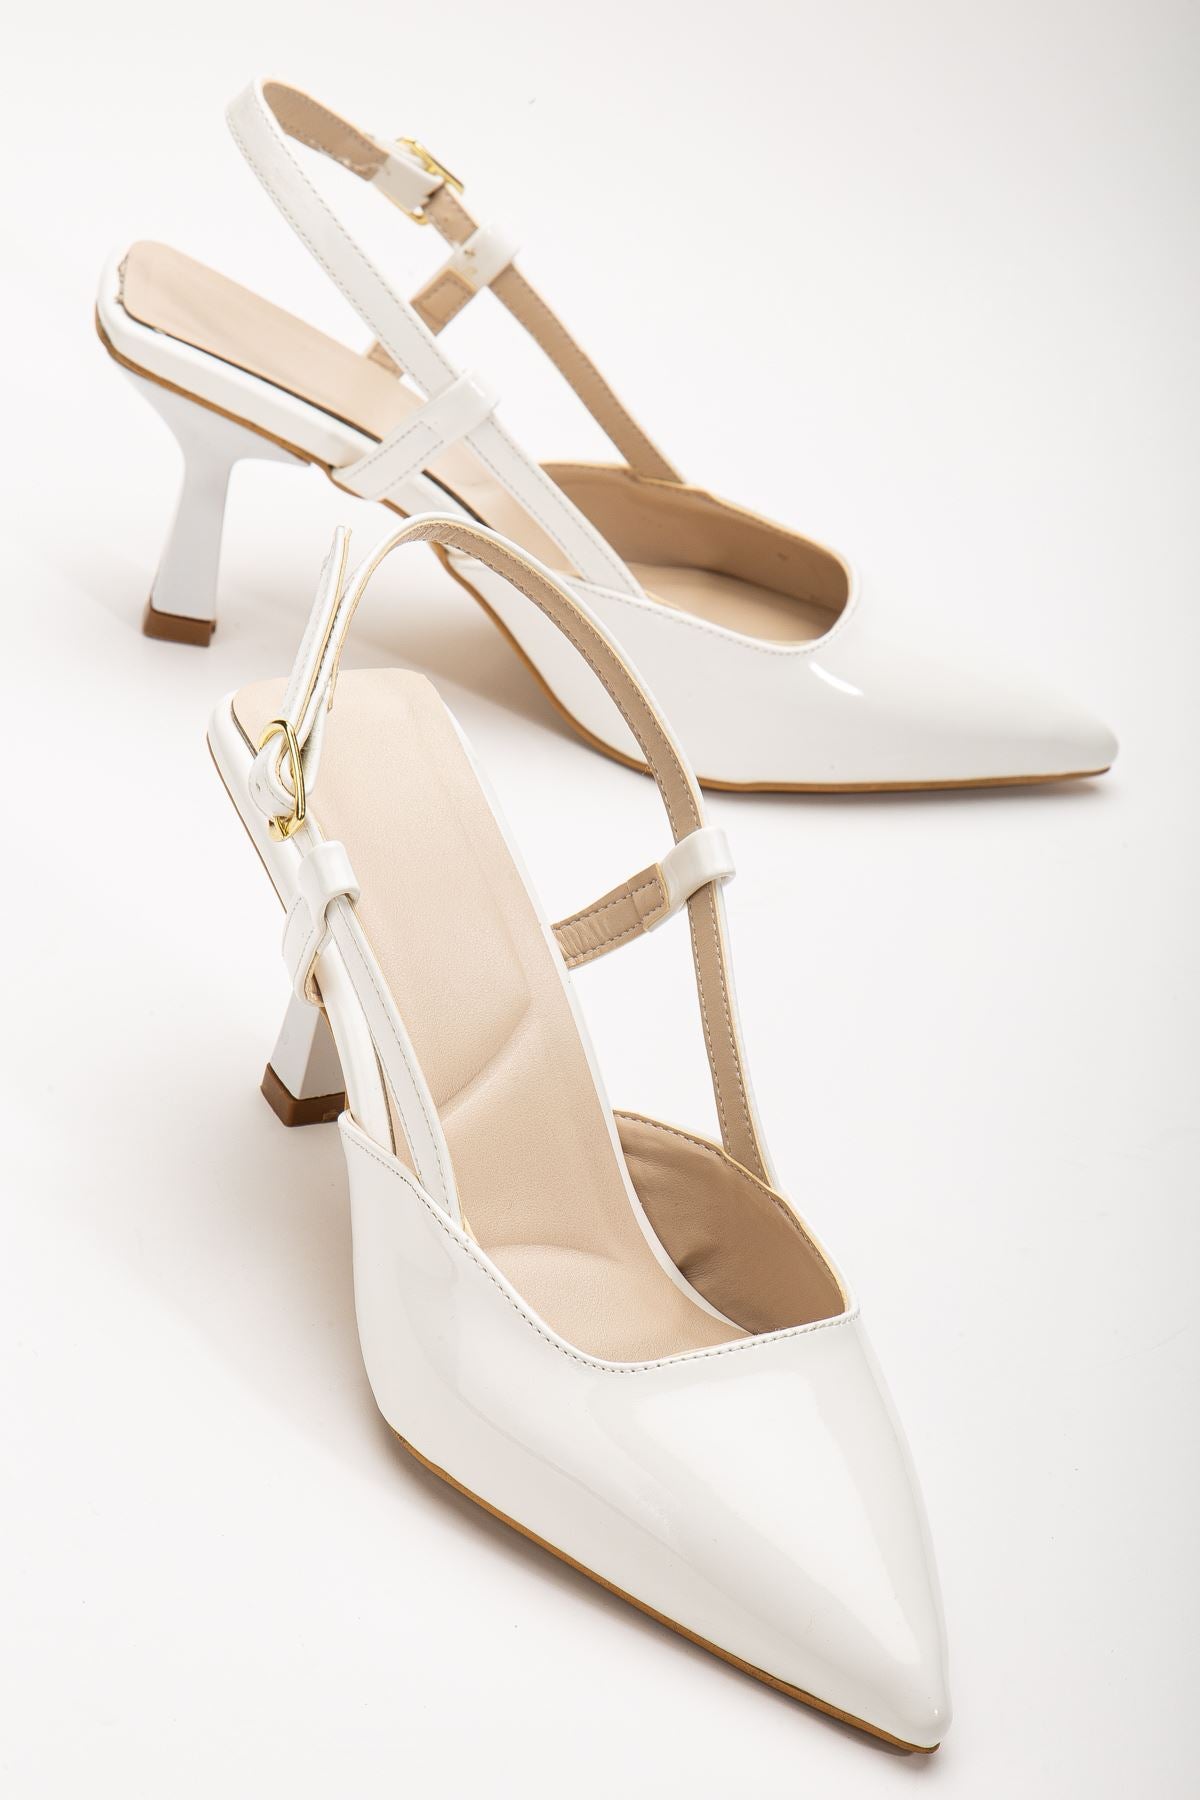 Women's White Patent Leather Thin Heeled Shoes - STREETMODE™